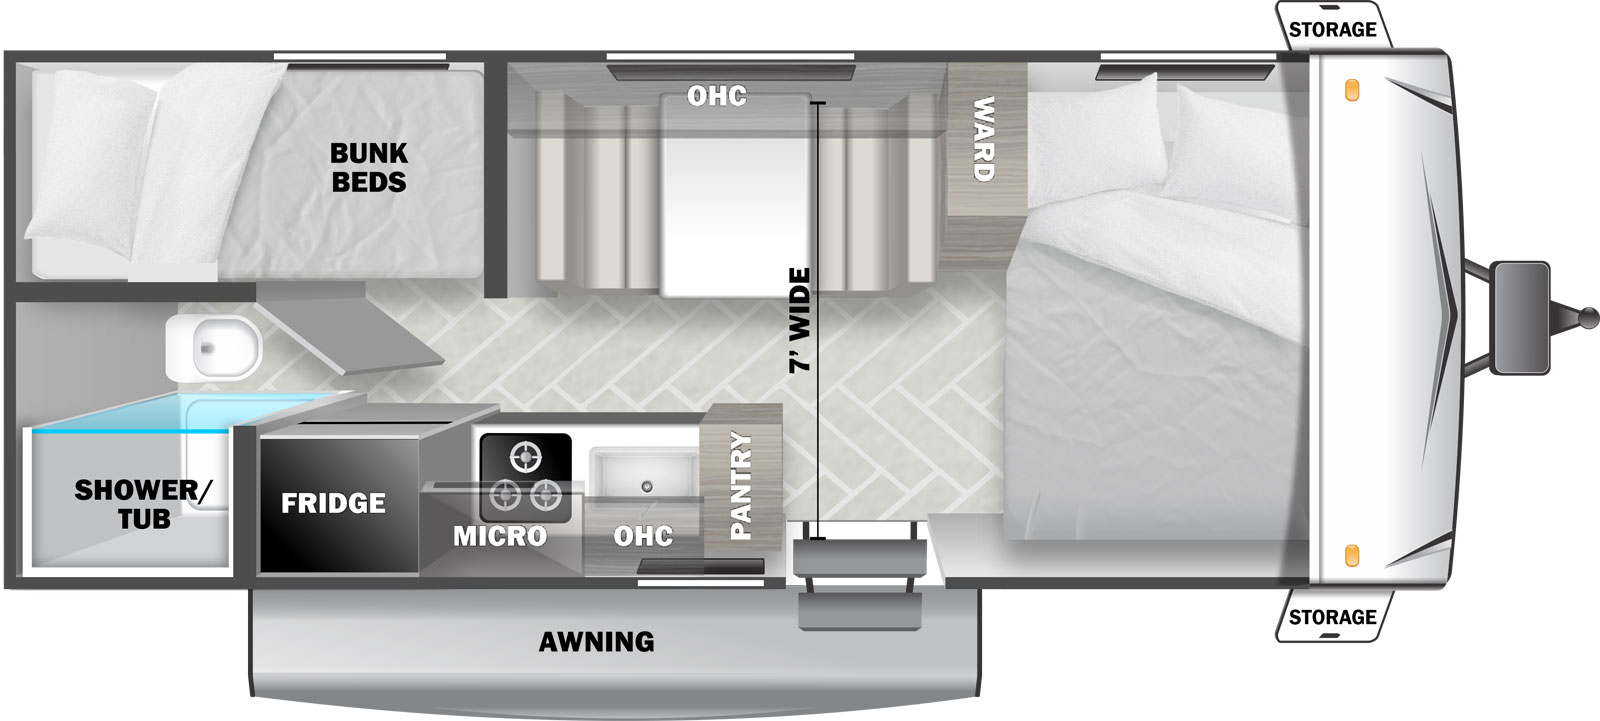 Cruise Lite West T177BQ floorplan. The T177BQ has no slide outs and one entry door.